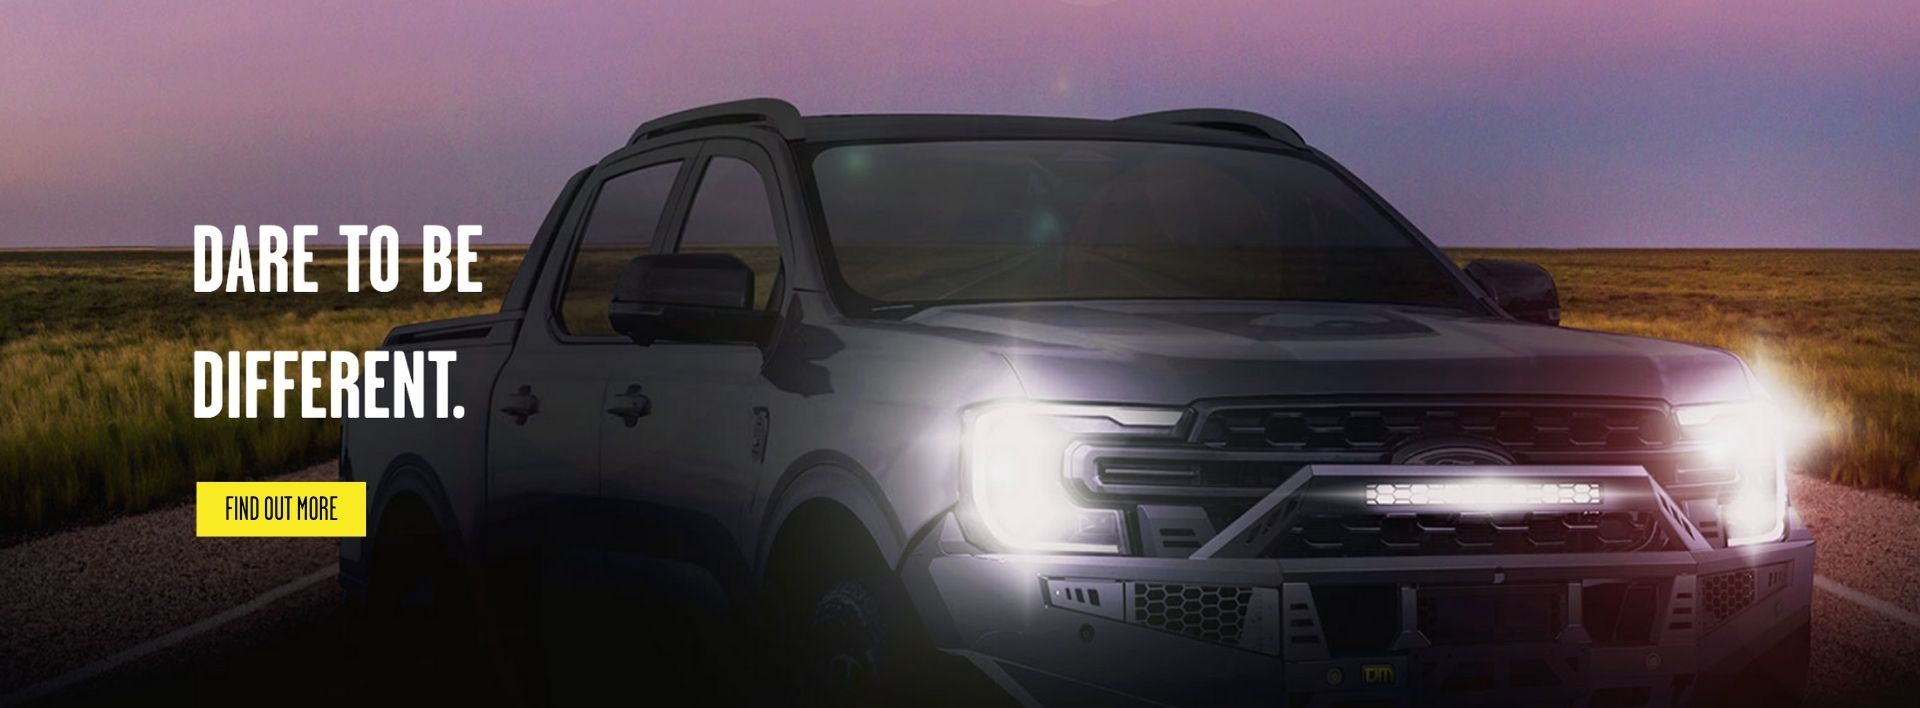 TJM 4X4 ACCESSORIES TO SUIT FORD RANGER COMING SOON